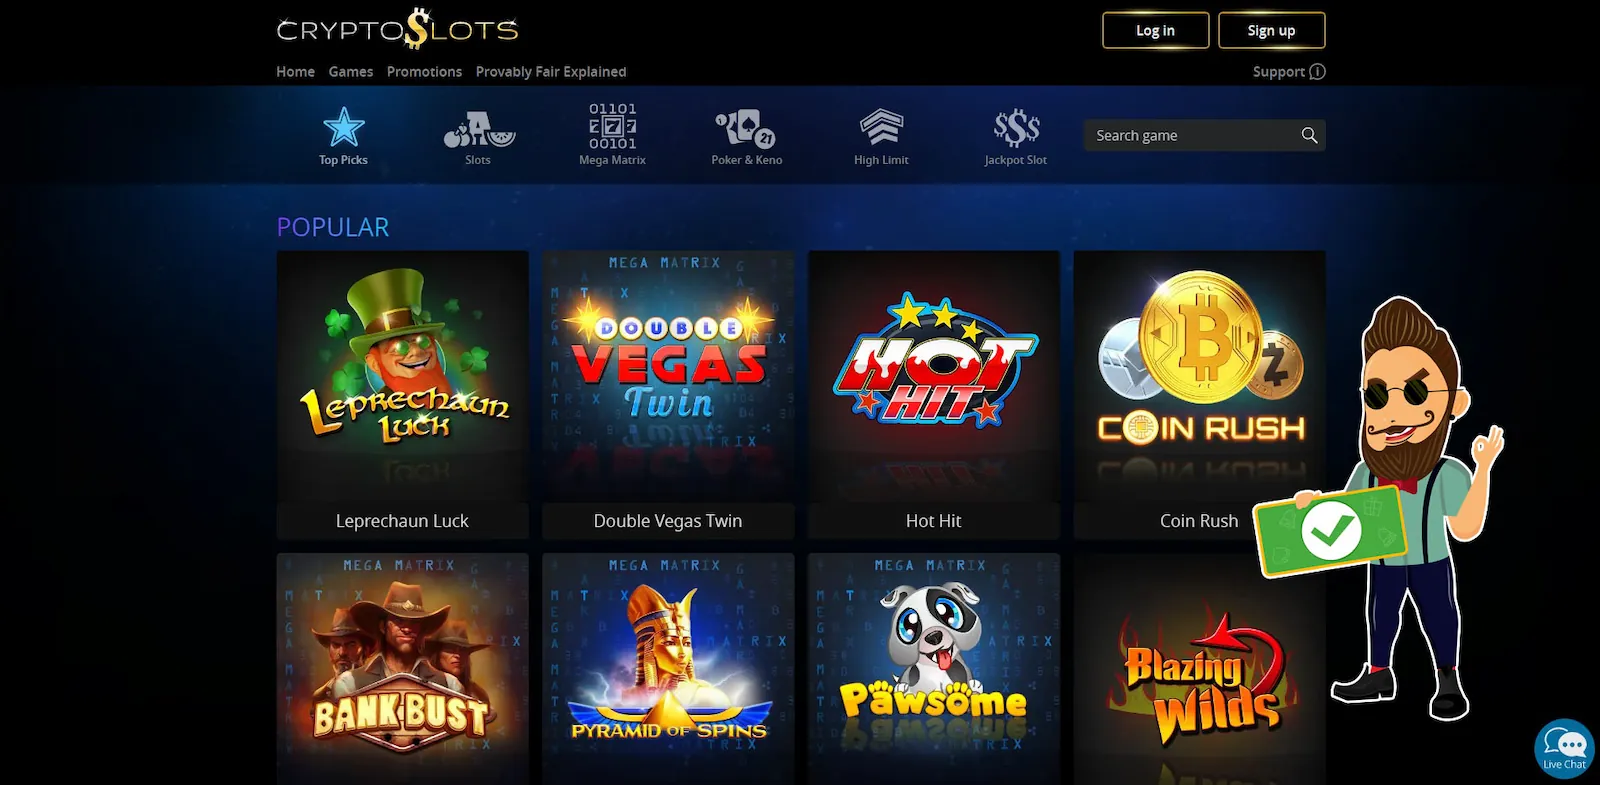 Casino Games Available At Cryptoslots